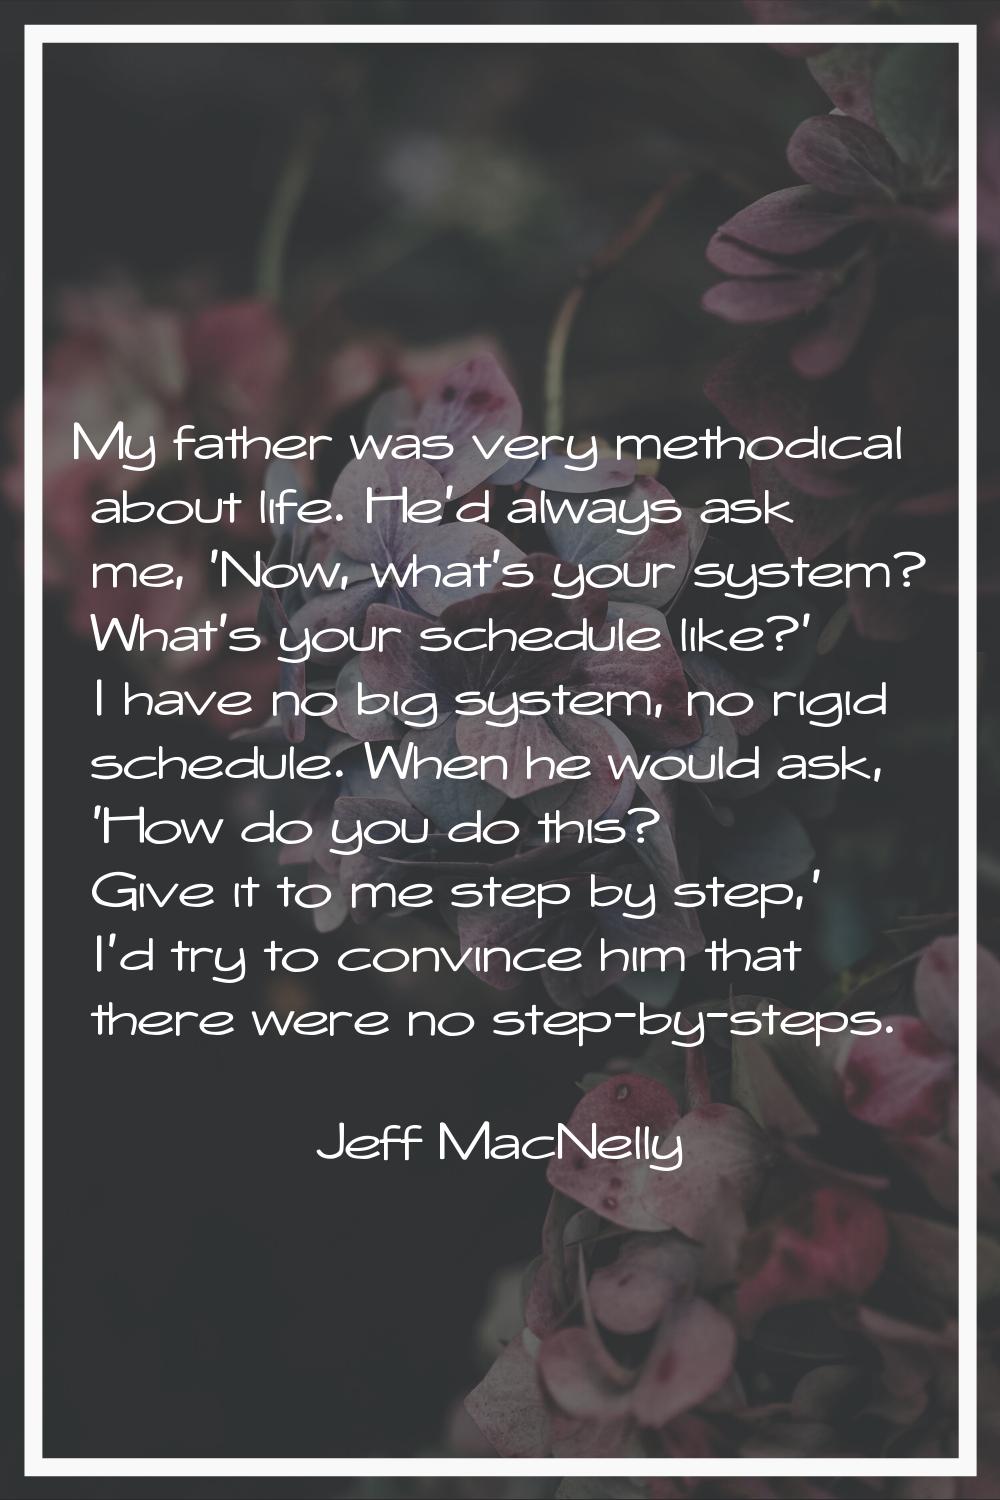 My father was very methodical about life. He'd always ask me, 'Now, what's your system? What's your